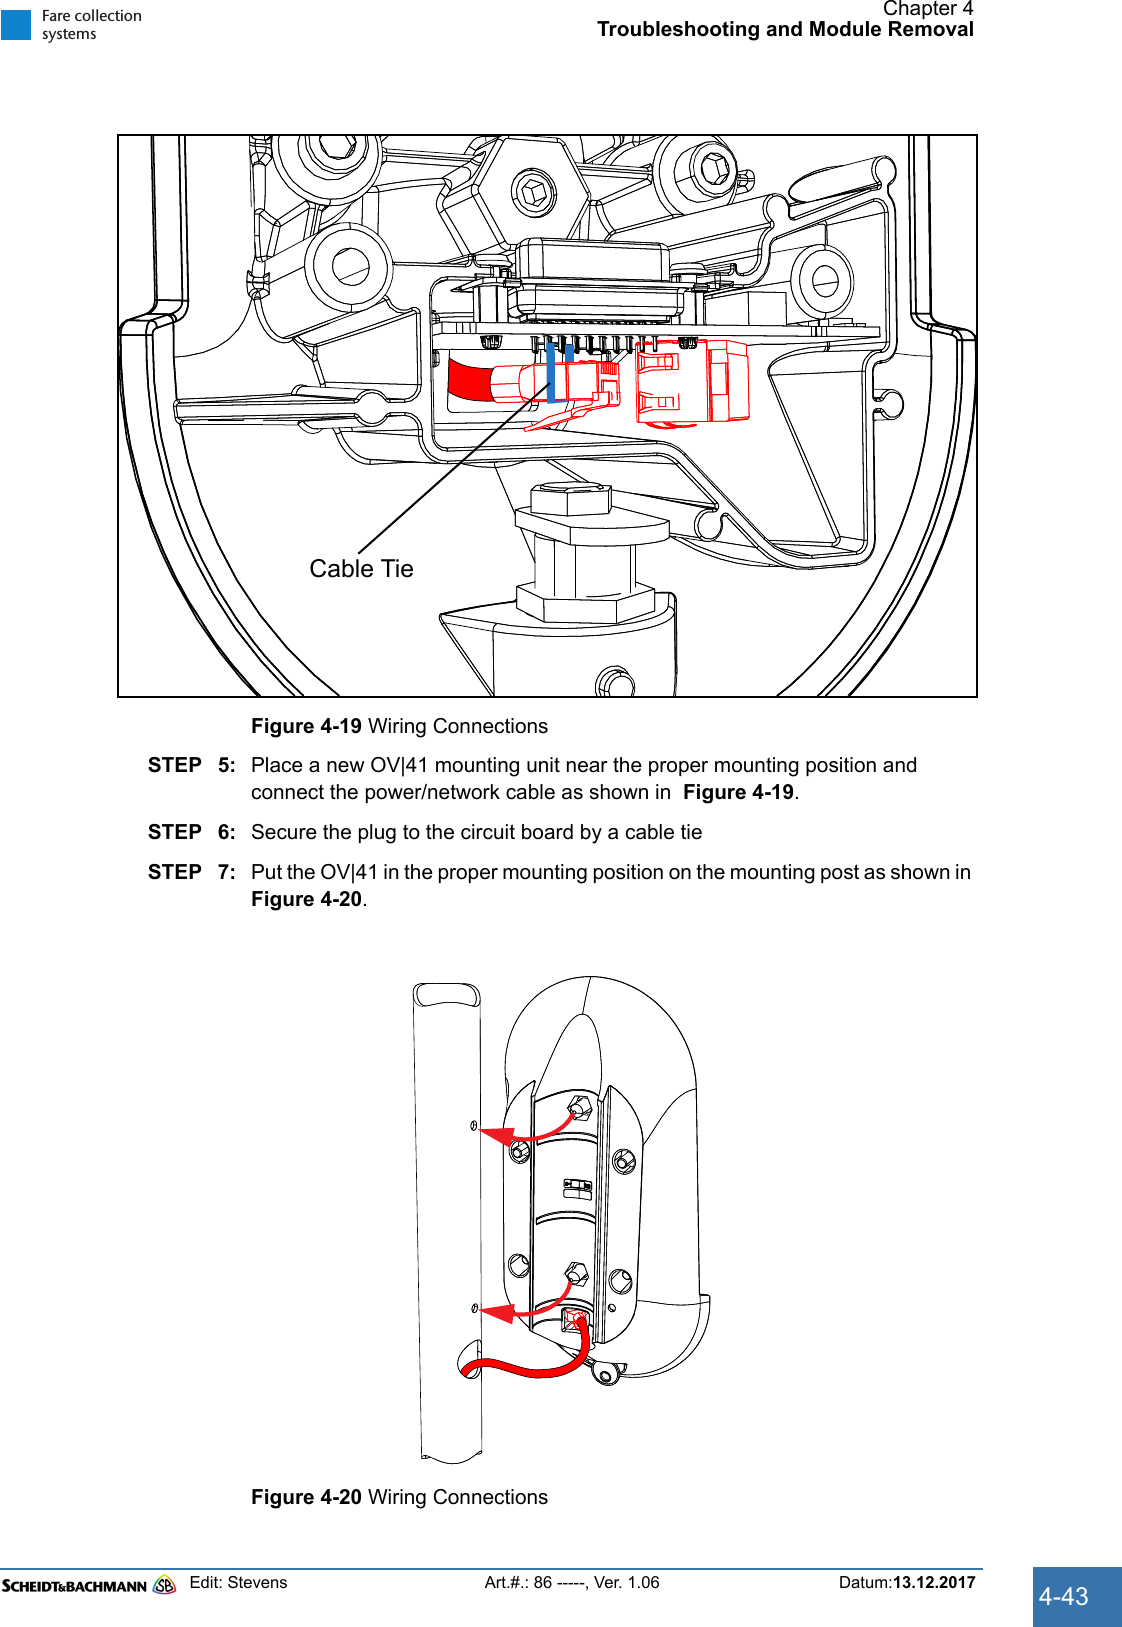 Chapter 4Troubleshooting and Module RemovalEdit: Stevens Art.#.: 86 -----, Ver. 1.06 Datum:13.12.2017 4-43Fare collectionsystemsFigure 4-19 Wiring ConnectionsSTEP 5: Place a new OV|41 mounting unit near the proper mounting position and connect the power/network cable as shown in  Figure 4-19.STEP 6: Secure the plug to the circuit board by a cable tieSTEP 7: Put the OV|41 in the proper mounting position on the mounting post as shown in  Figure 4-20.Figure 4-20 Wiring ConnectionsCable Tie